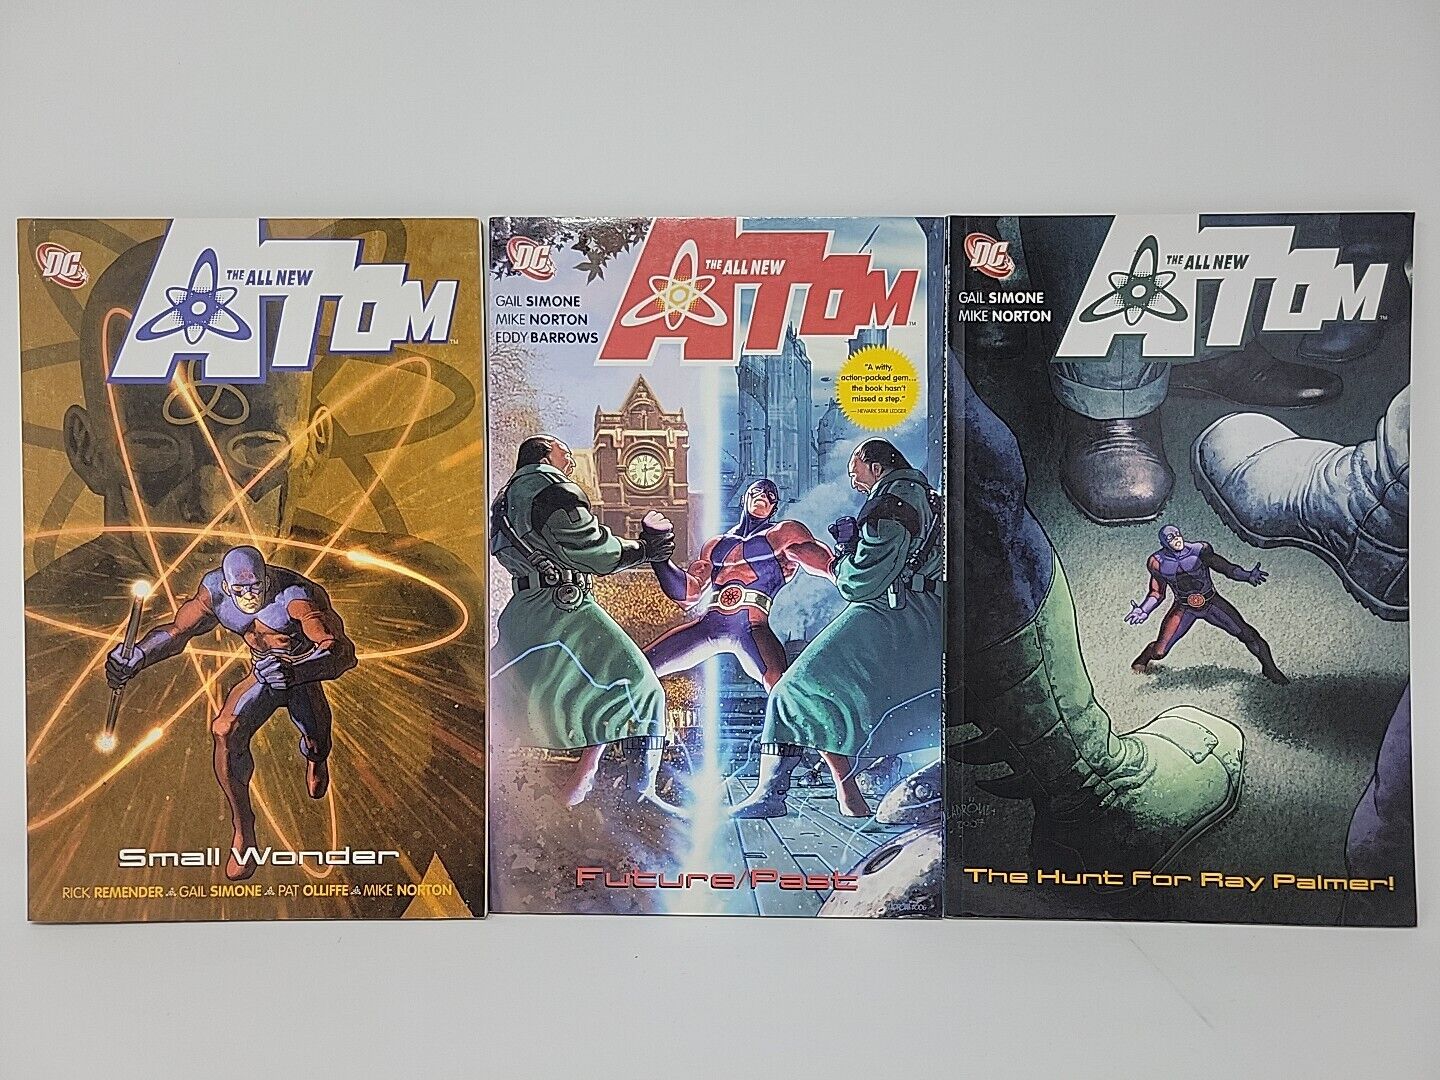 All-New Atom - Set of 3 - Future/Past - Hunt For Ray Palmer - Small Wonder